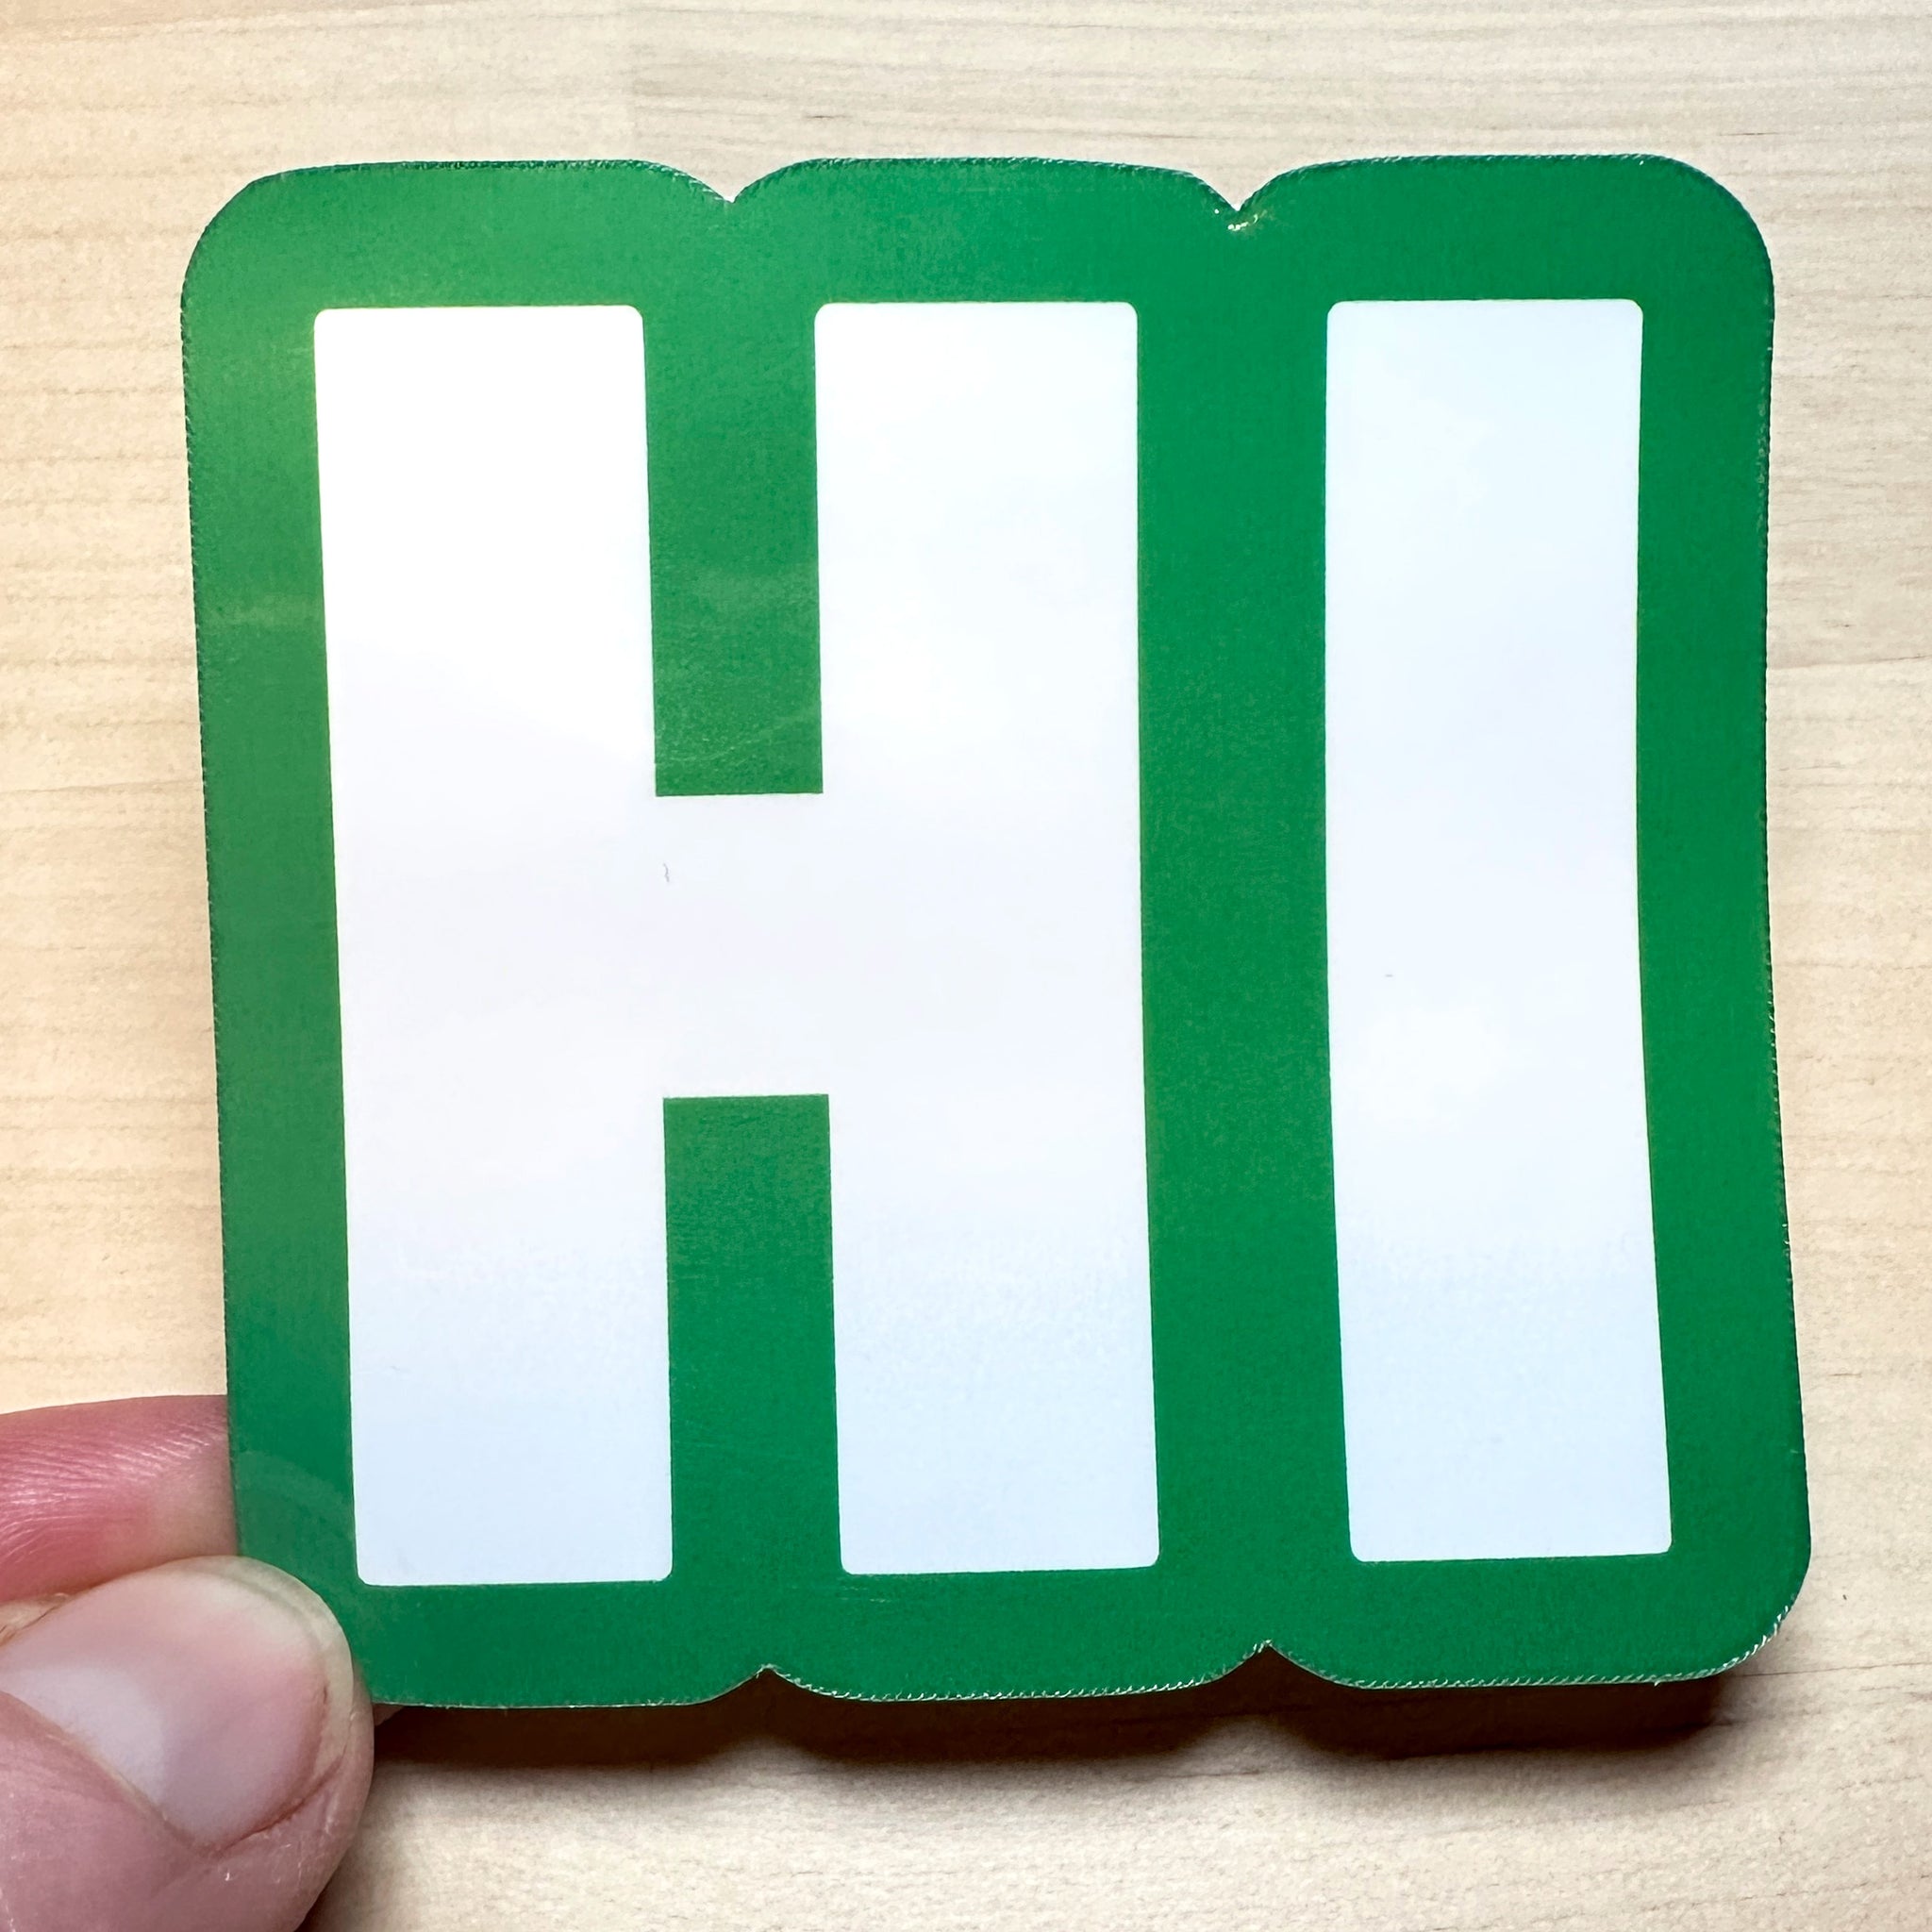 photo of square vinyl sticker with the word HI in white with a green background